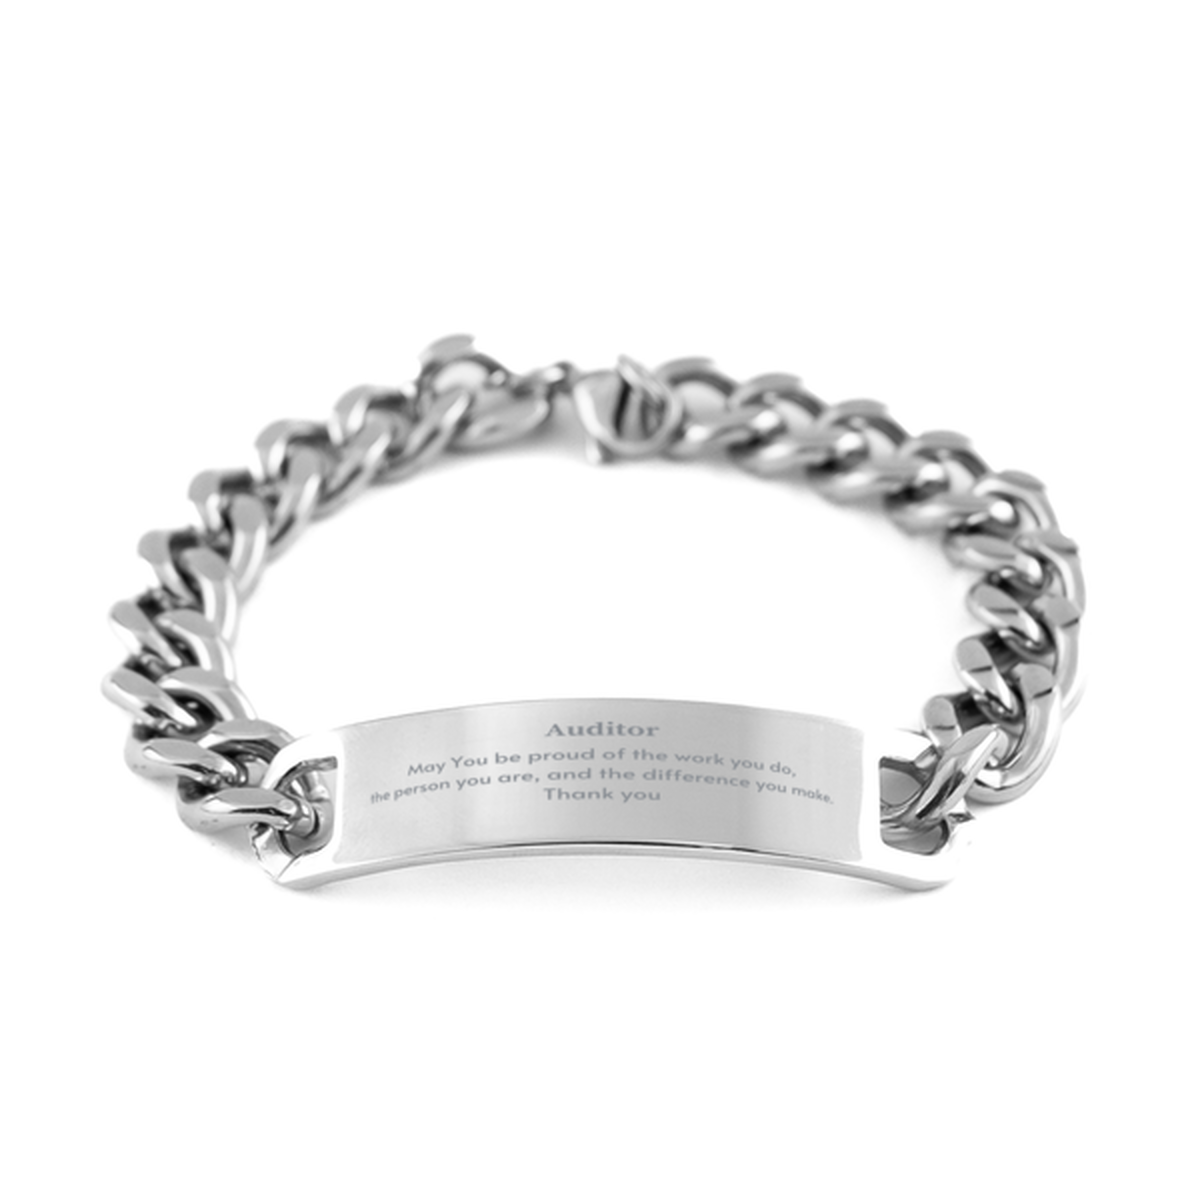 Heartwarming Cuban Chain Stainless Steel Bracelet Retirement Coworkers Gifts for Auditor, Auditor May You be proud of the work you do, the person you are Gifts for Boss Men Women Friends